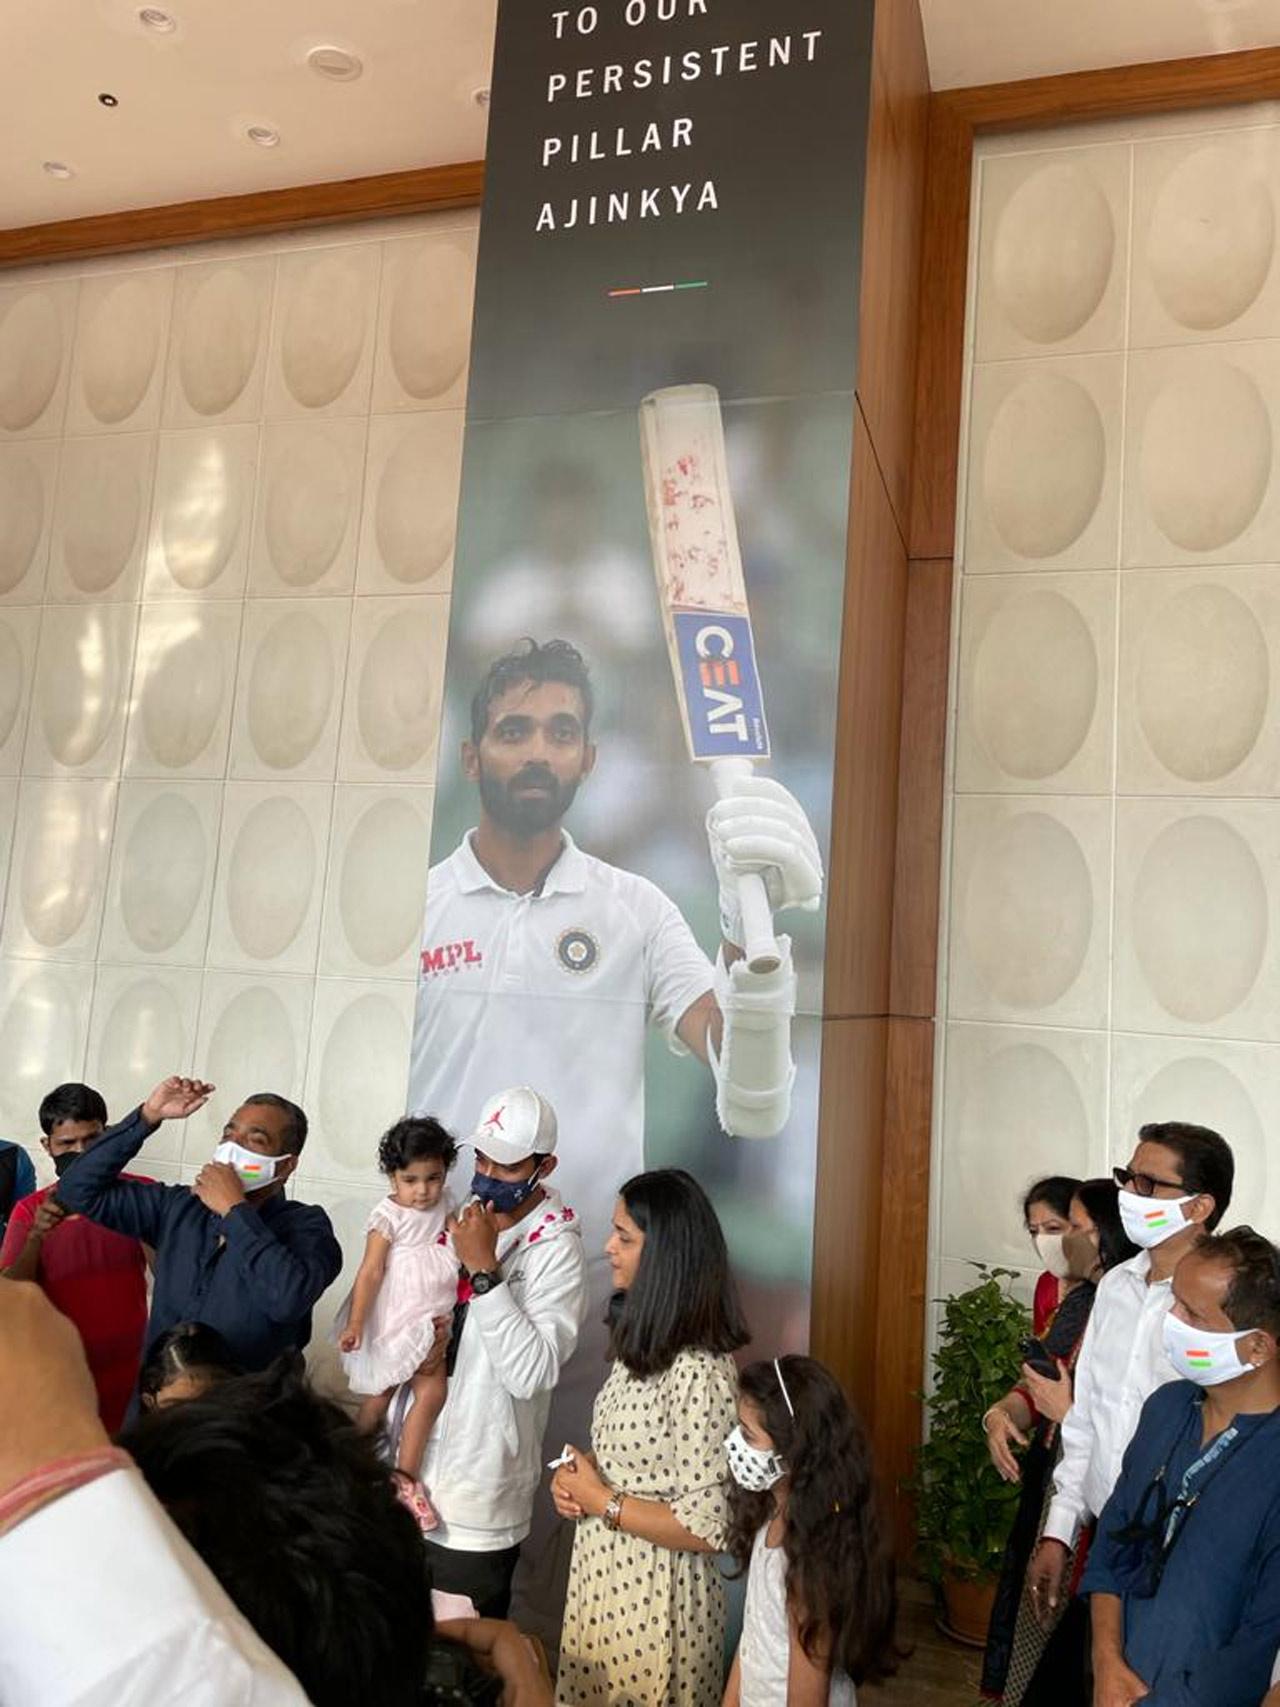 Team India won the fourth and final Test at The Gabba in historic fashion by 3 wickets after they lost the first Test, won the second Test and drew the third. In pic: Rahane with wife Radhika and daughter Aarya next to a portrait honouring him at his residence in Matunga. Picture/ mid-day reader Shripal Sangvi